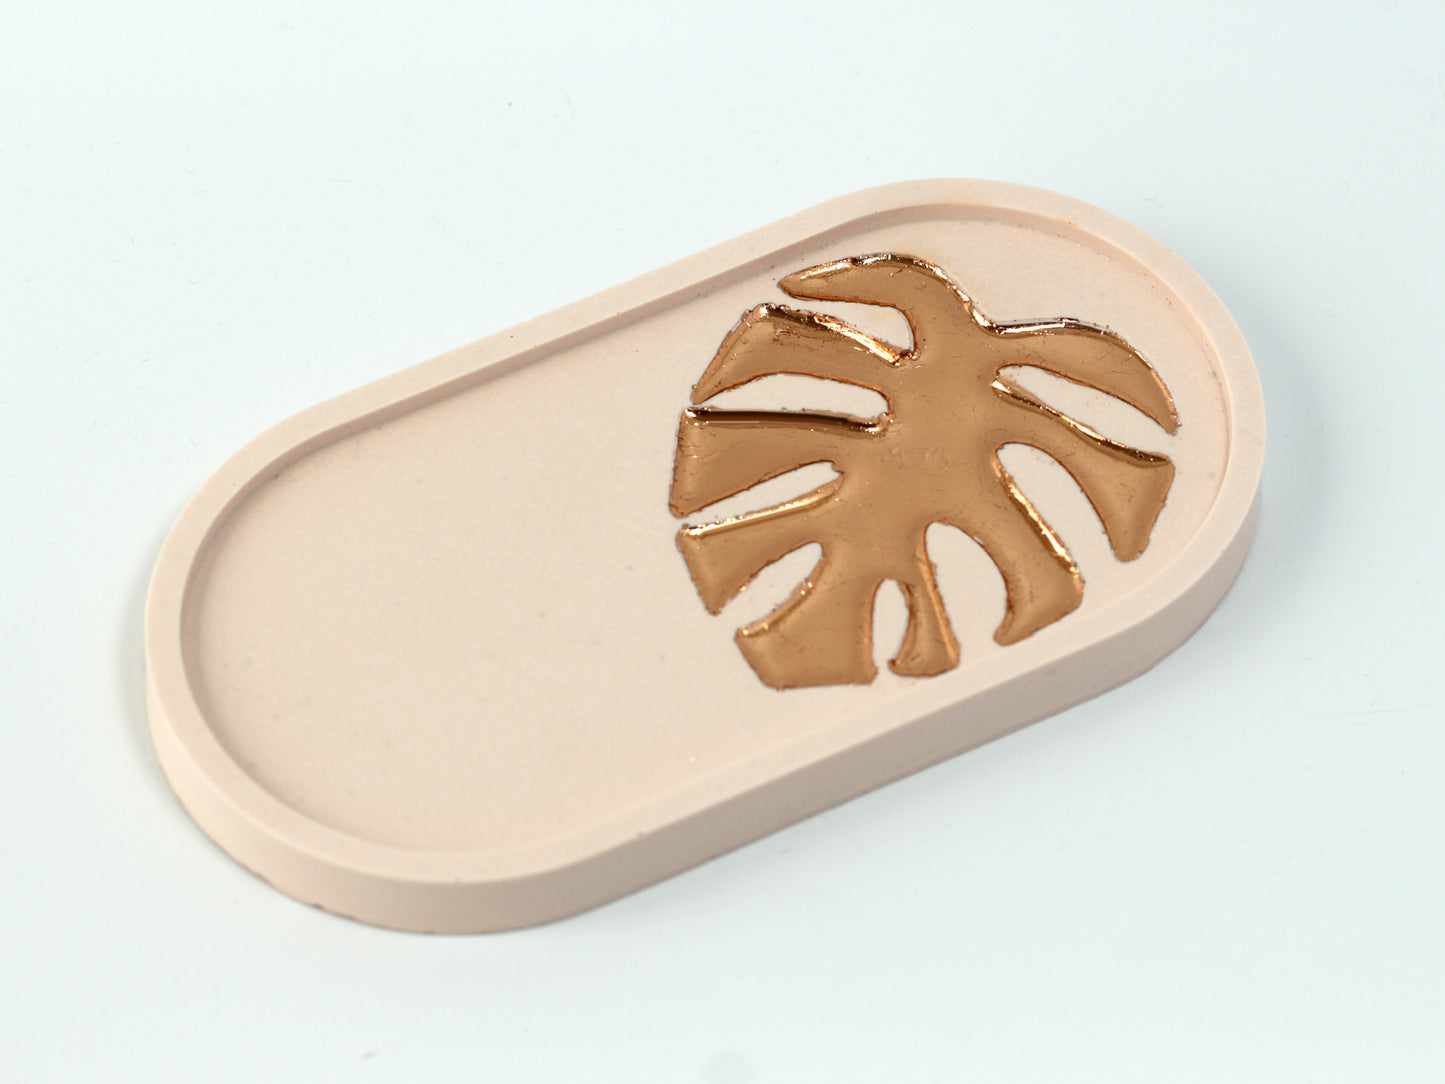 Oval tray with Imitation ros gold foil monstera leaf